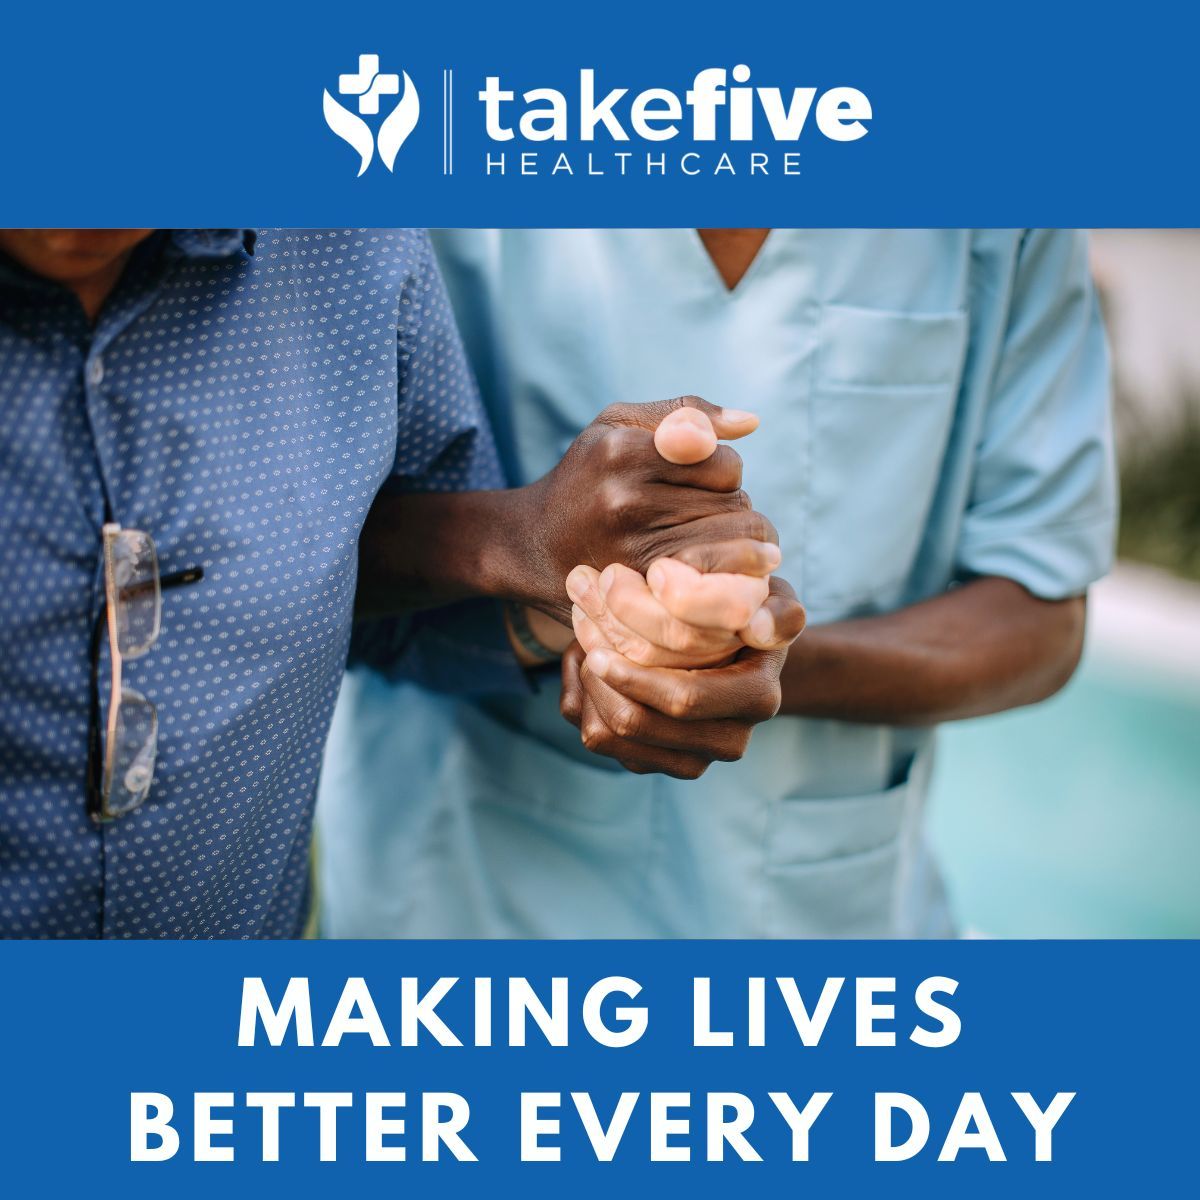 “Making lives better every day” Our dedicated team of Healthcare Assistants, Support Workers and Nurses make lives better across Gloucestershire each day Want to join the team? 👉 Search our current vacancies today: takefive-jobs.tribepad-gro.com/jobs/search #MakingLivesBetter #TakeFiveHealthcare